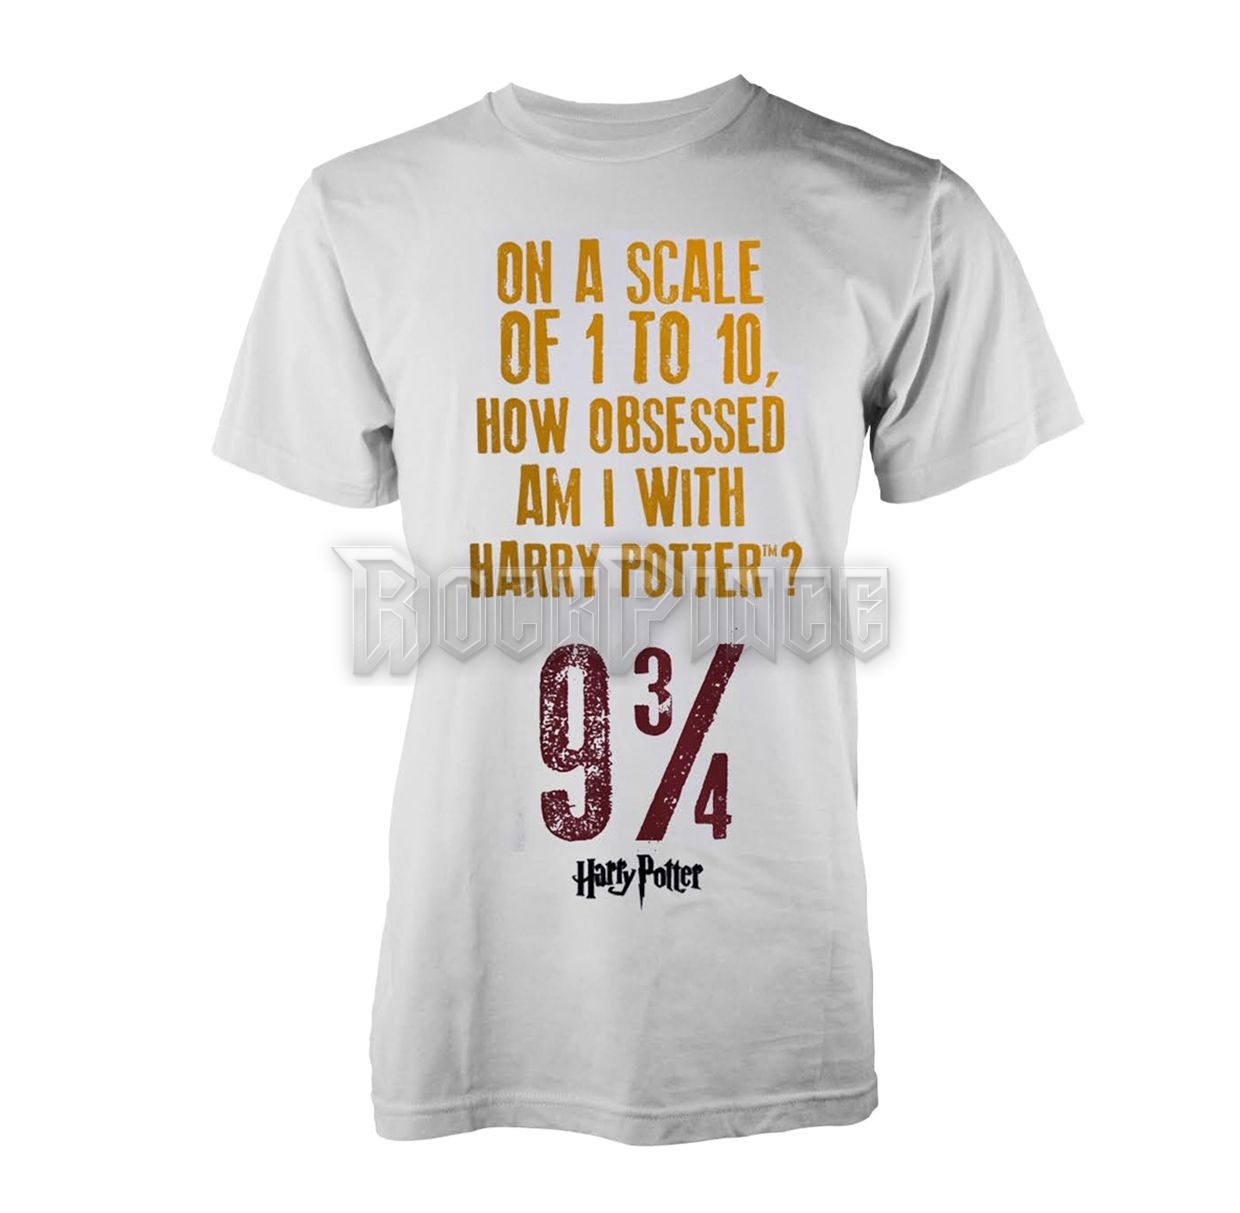 HARRY POTTER - OBSESSED - PH9790